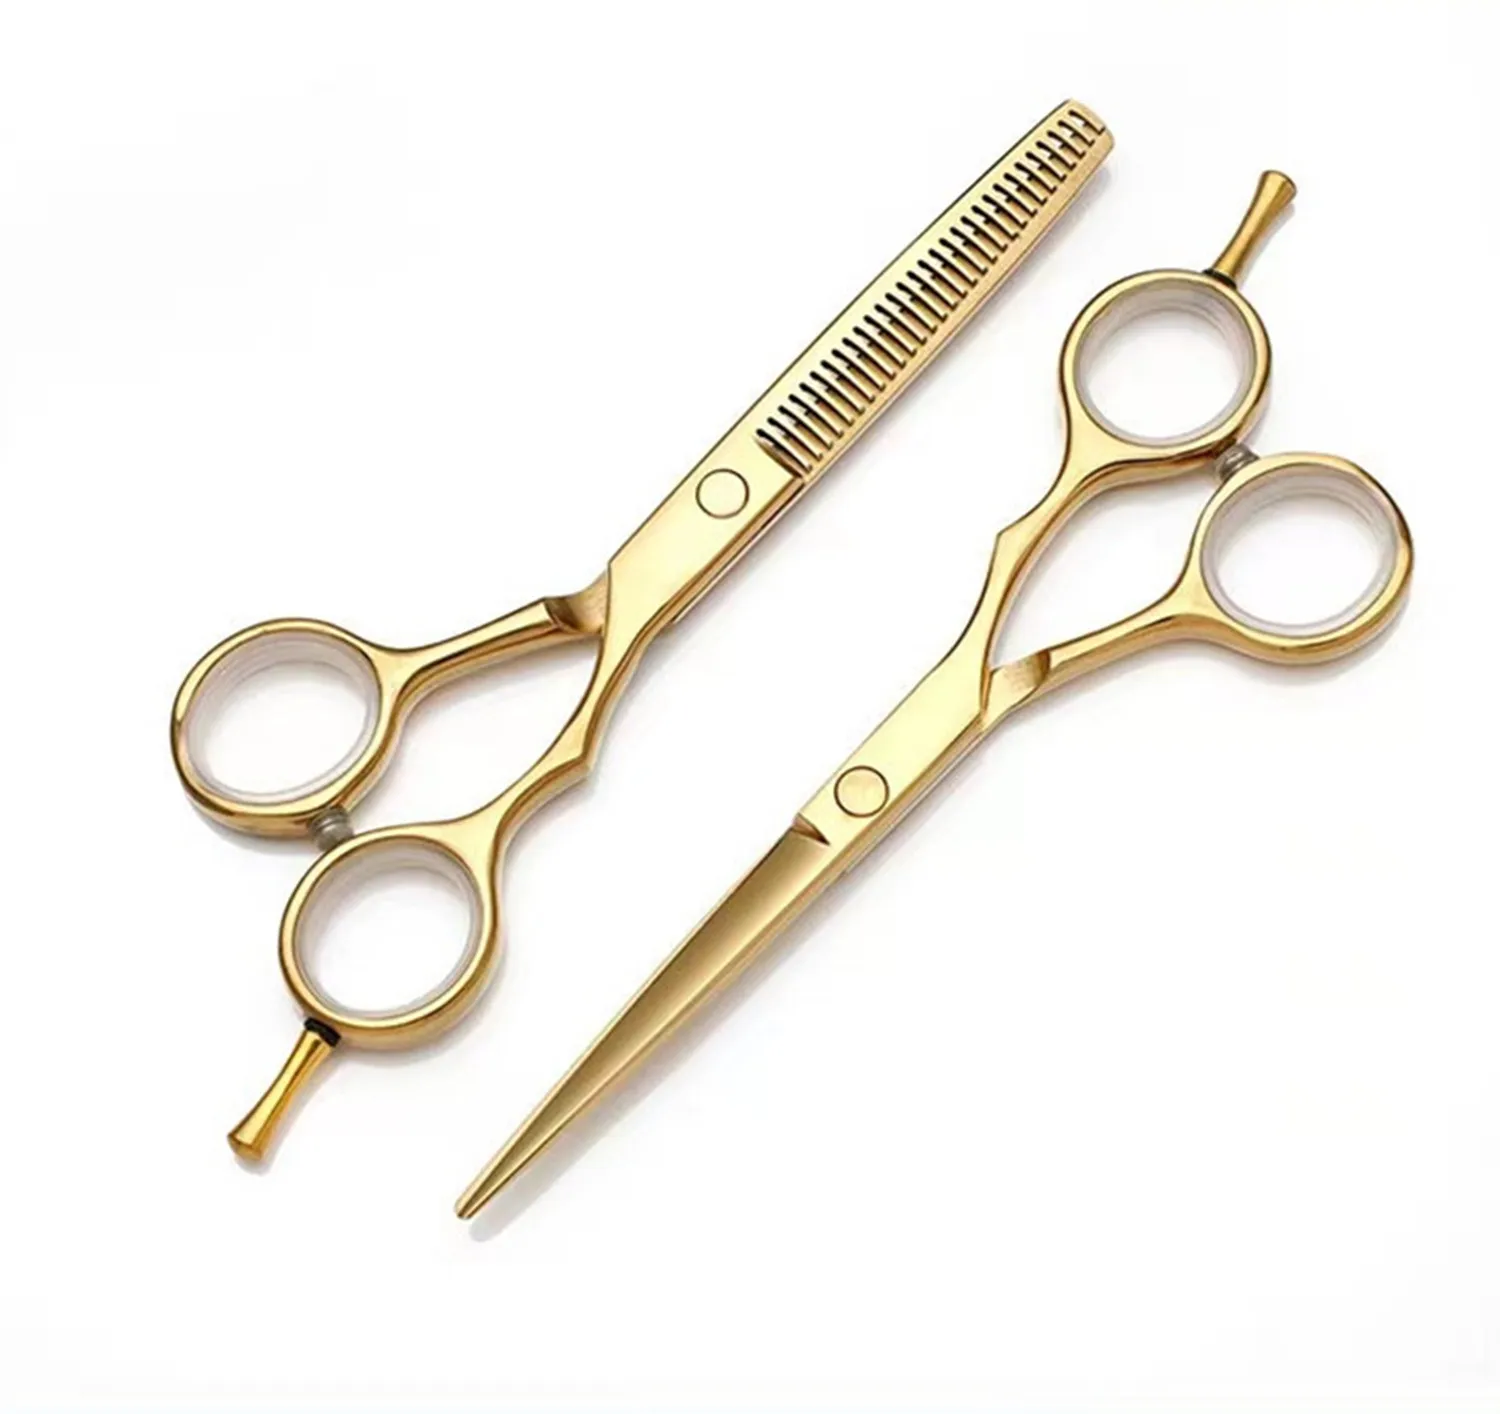 Professional 440C 6.0 Inch Hairdressing Scissors Shears Barber Cutting & Thinning Hair Scissors For Salon And Home Use